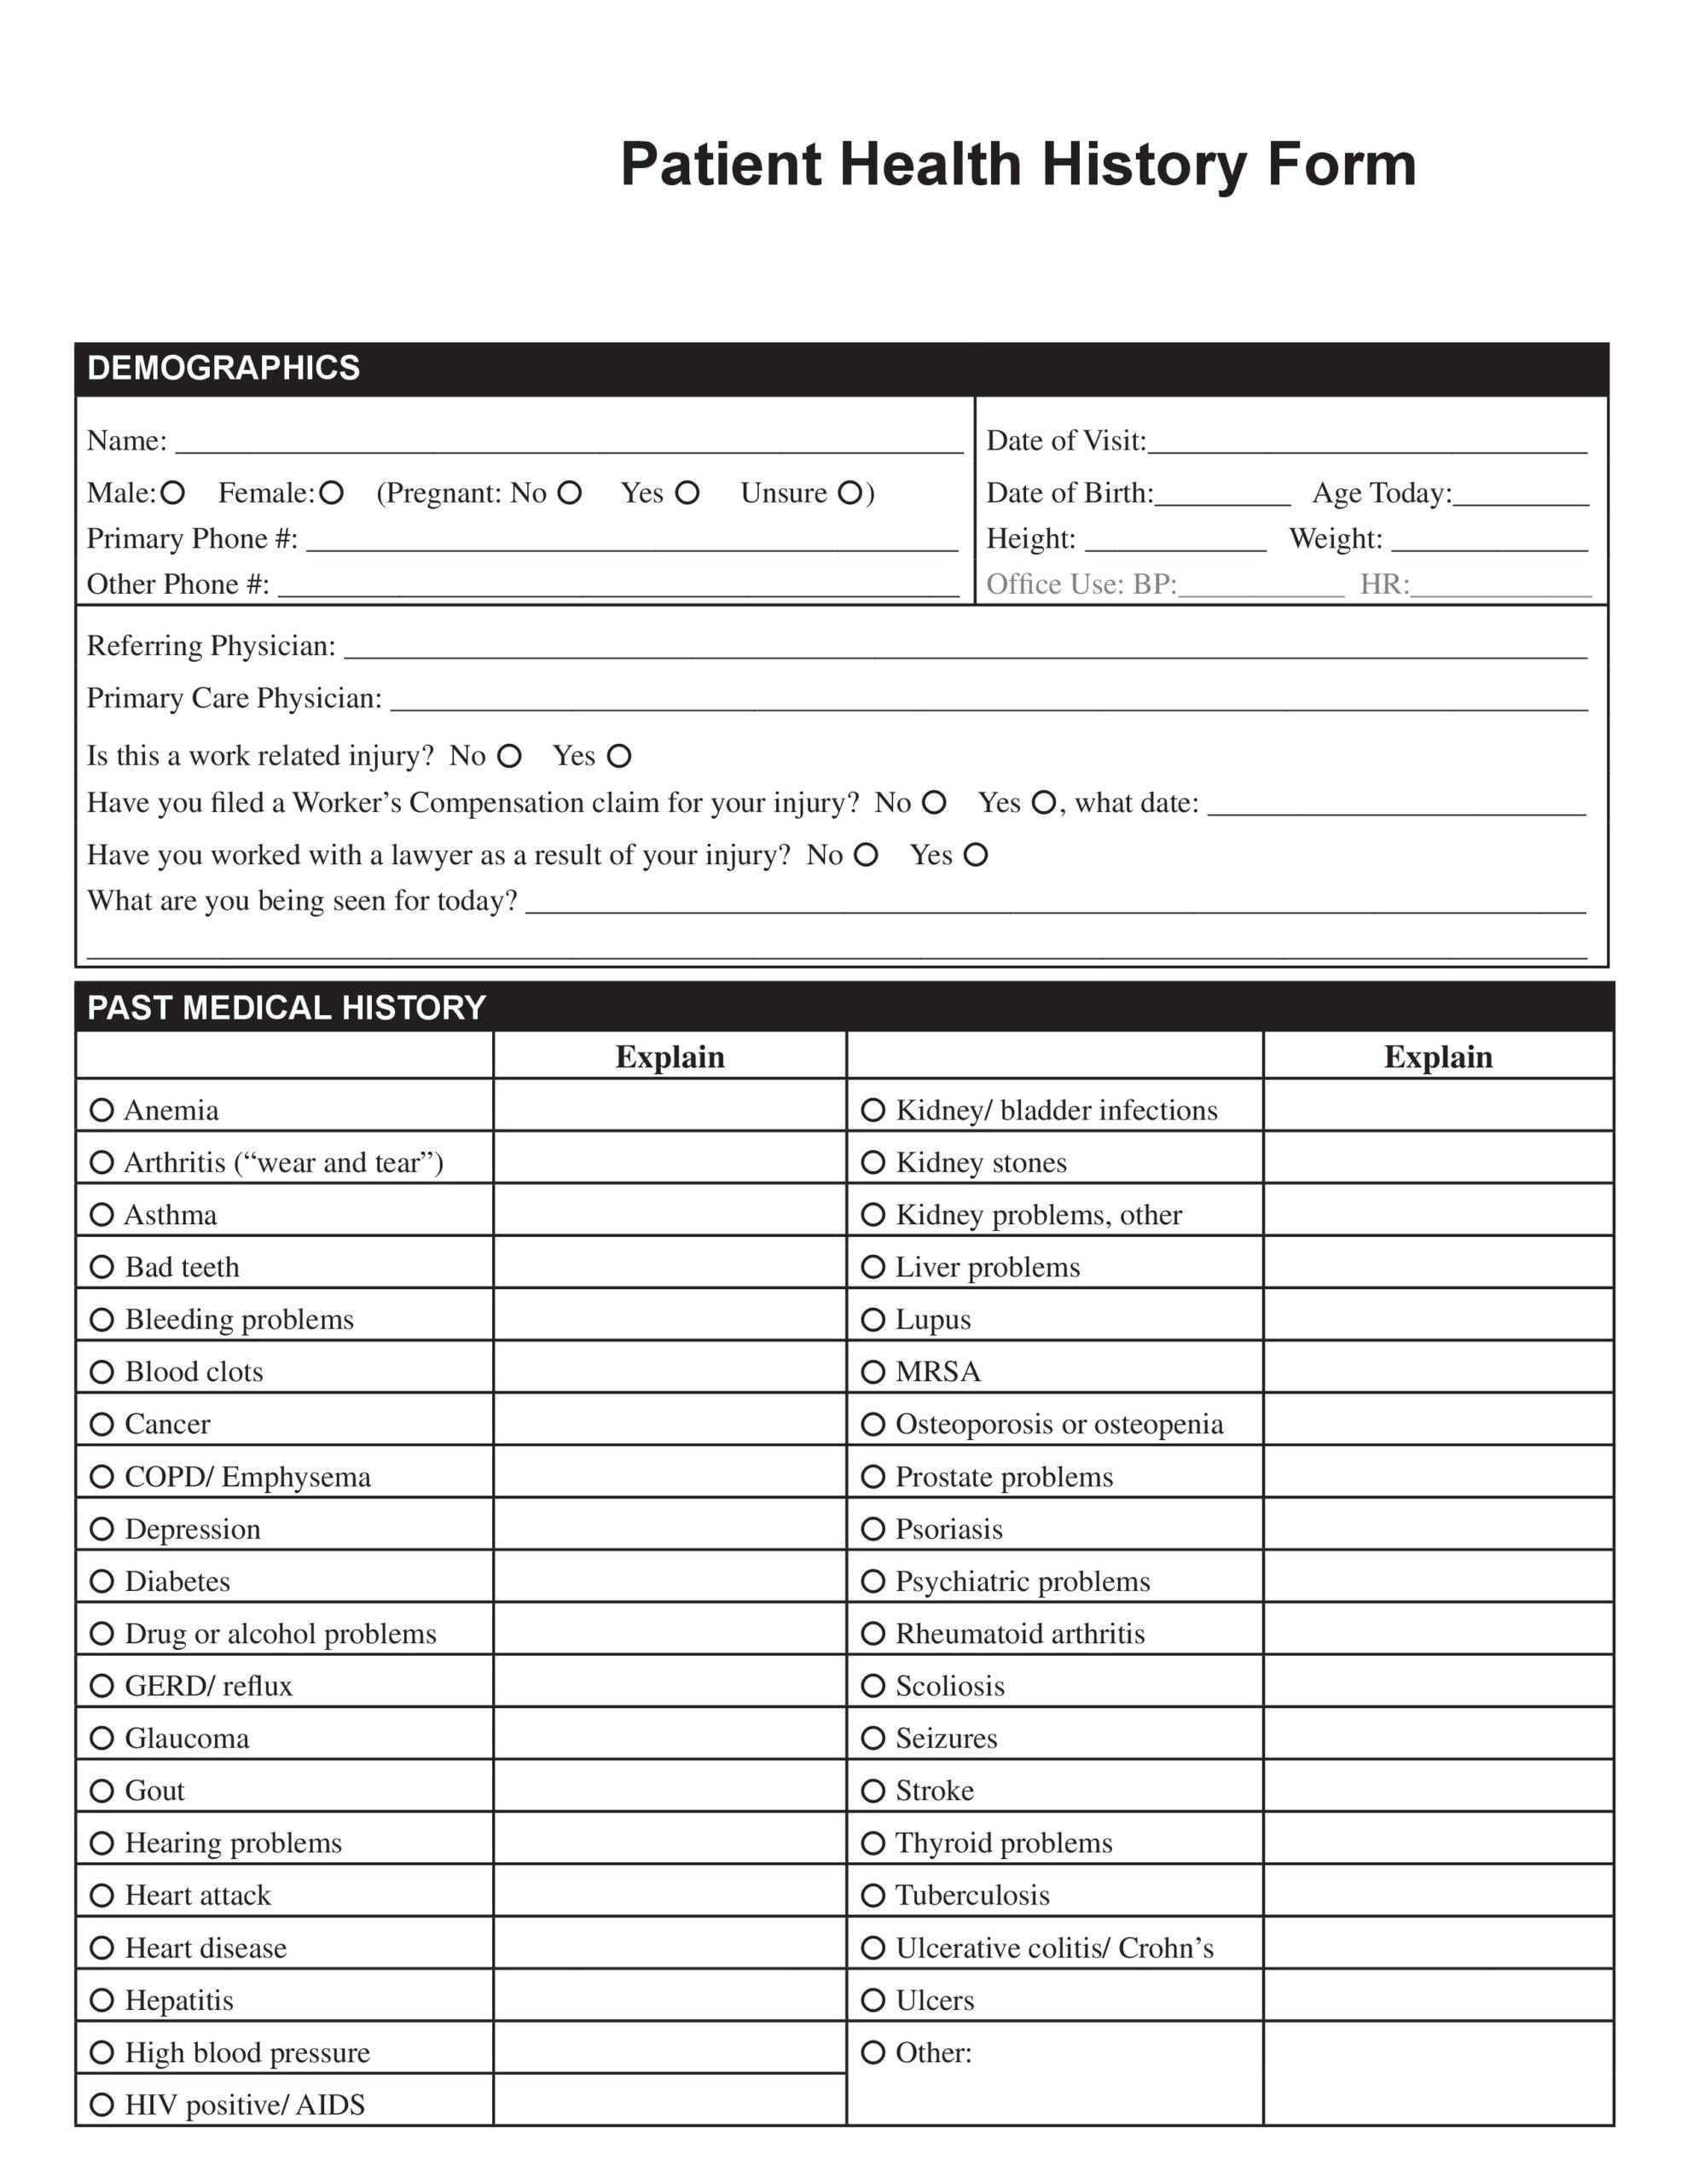 43-medical-health-history-forms-pdf-word-templatelab-bank2home